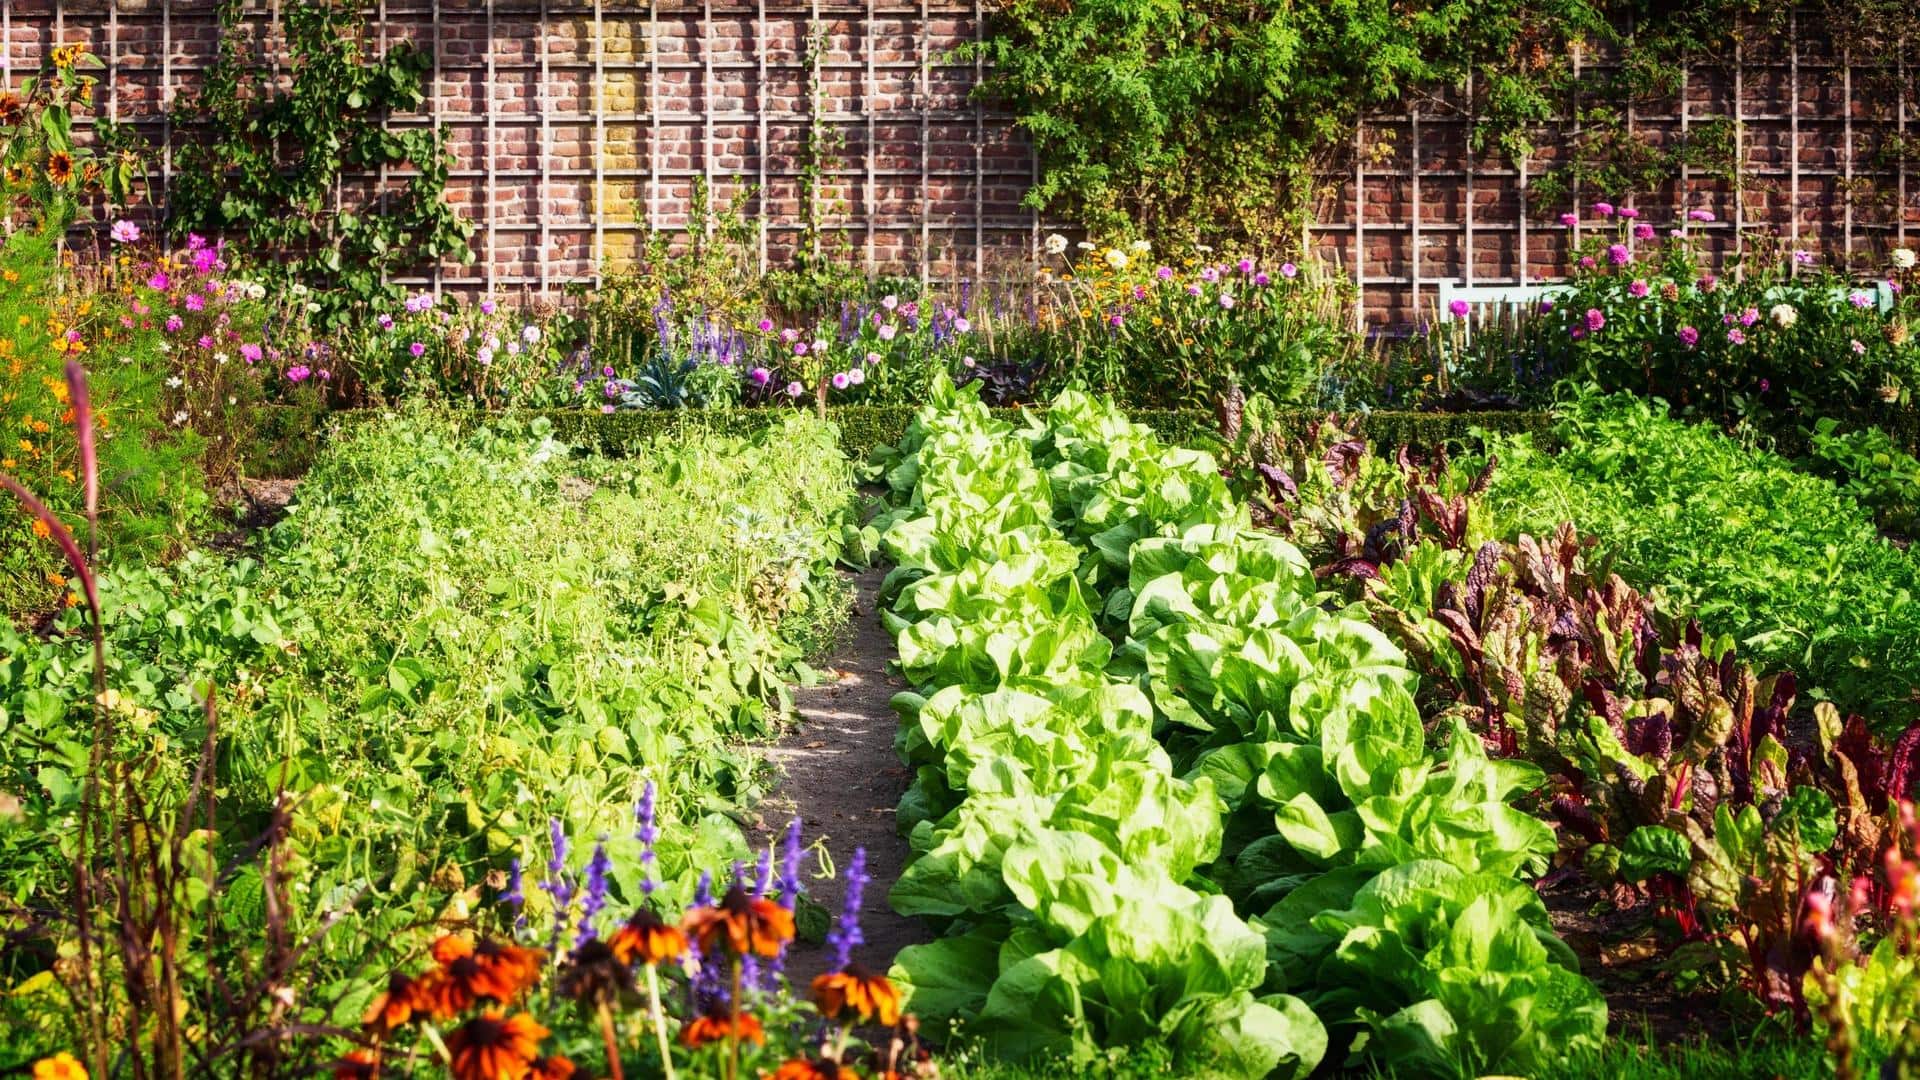 Tired of unkempt gardens? Simple tips to keep them clean